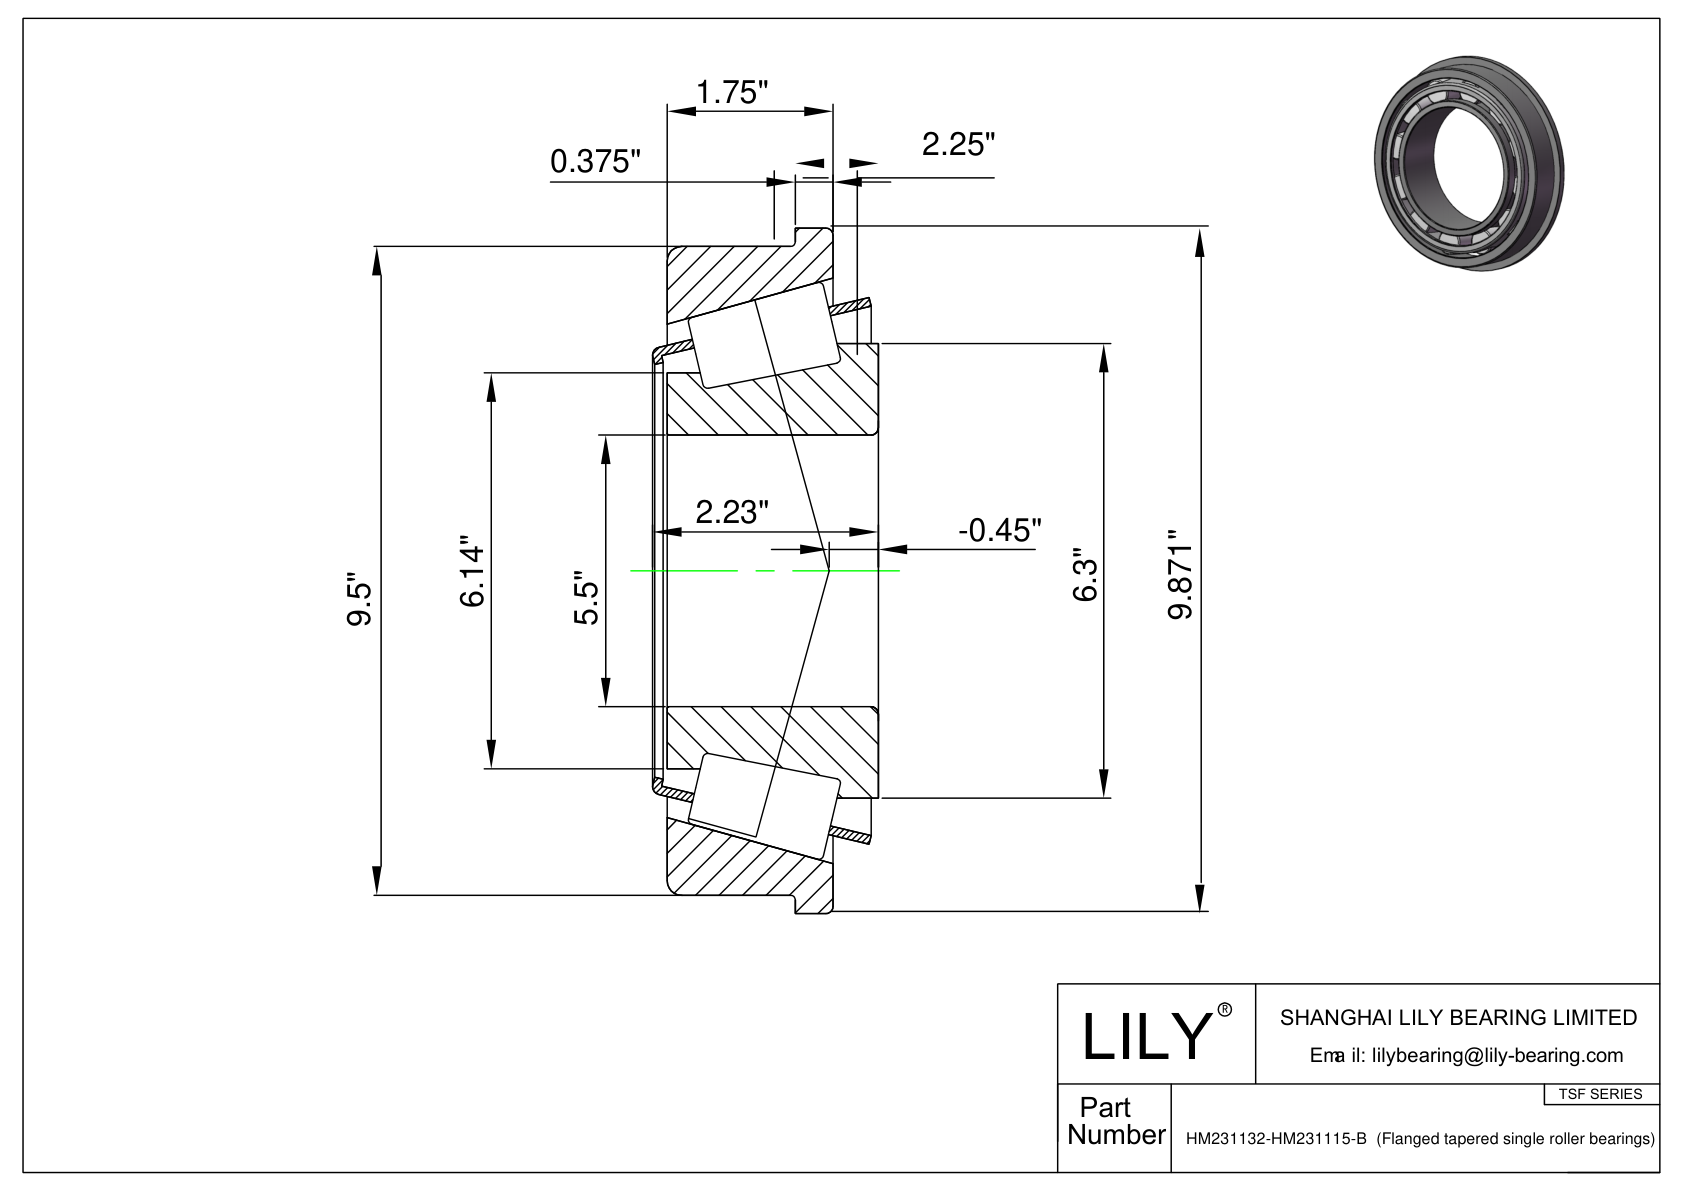 HM231132-HM231115-B TSF (Tapered Single Roller Bearings with Flange) (Imperial) cad drawing